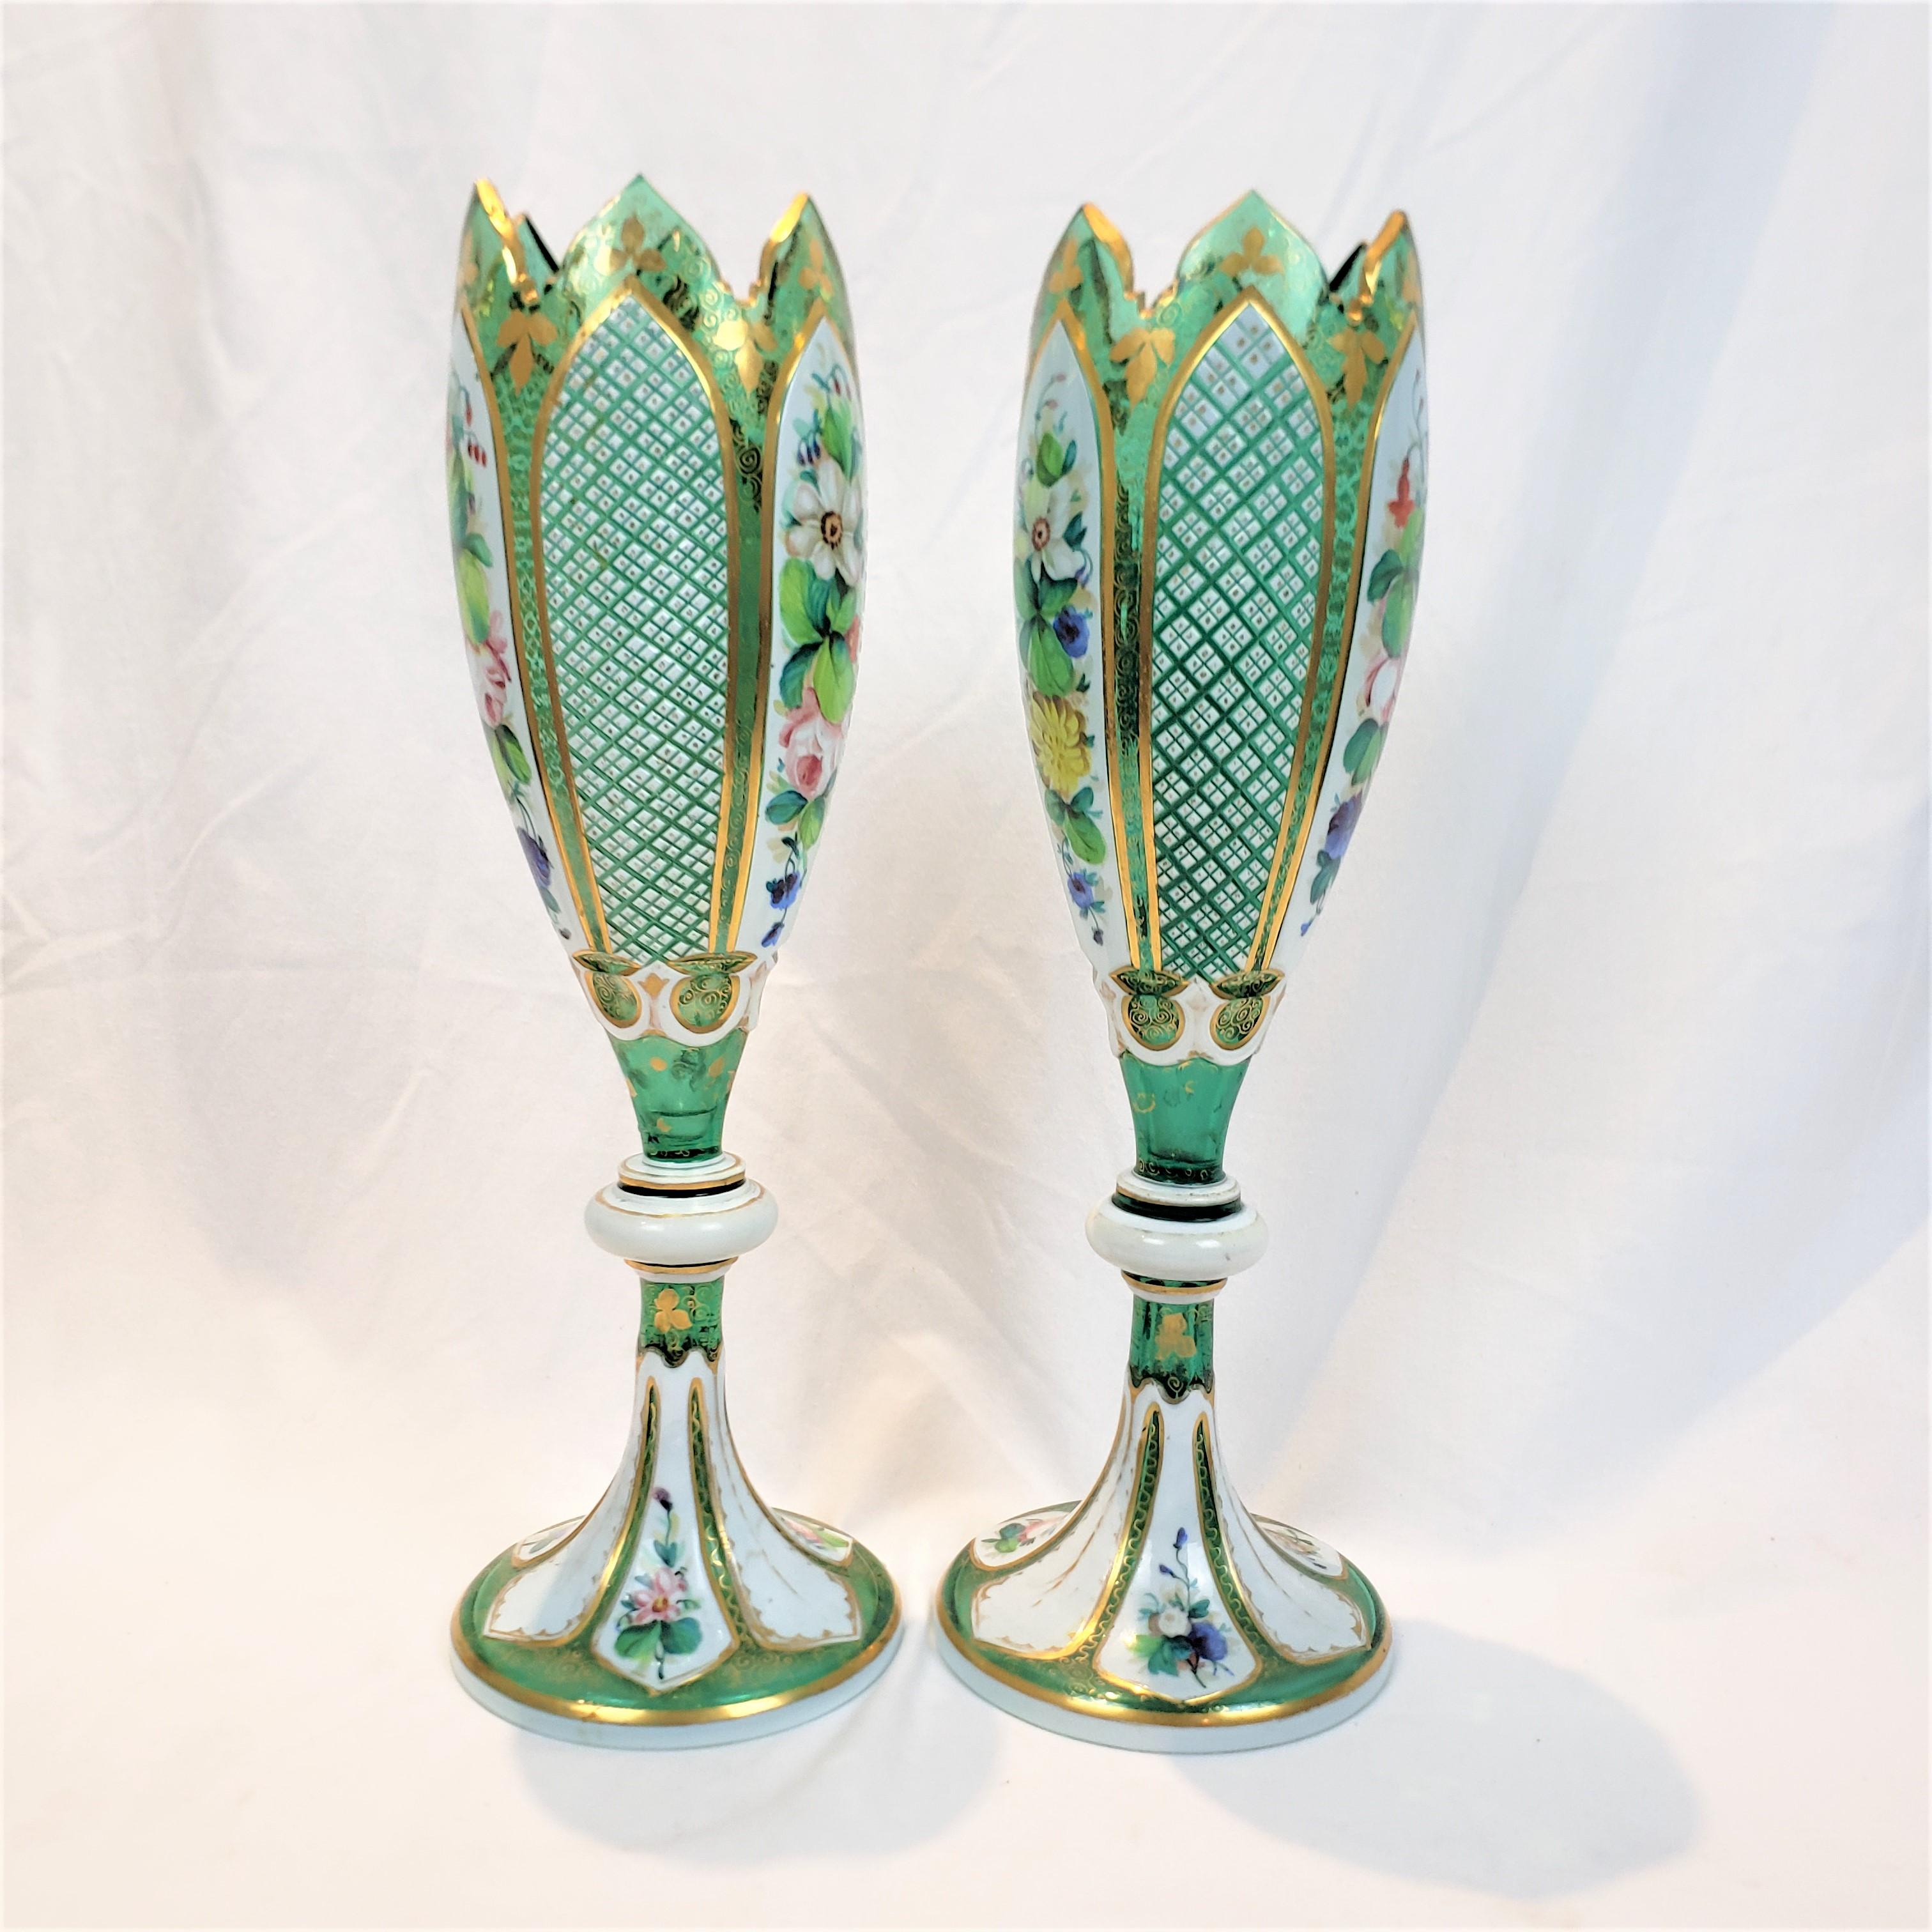 Enameled Pair of Antique Moser Style Green Glass Vases with Enamelled Panels & Gilt Decor